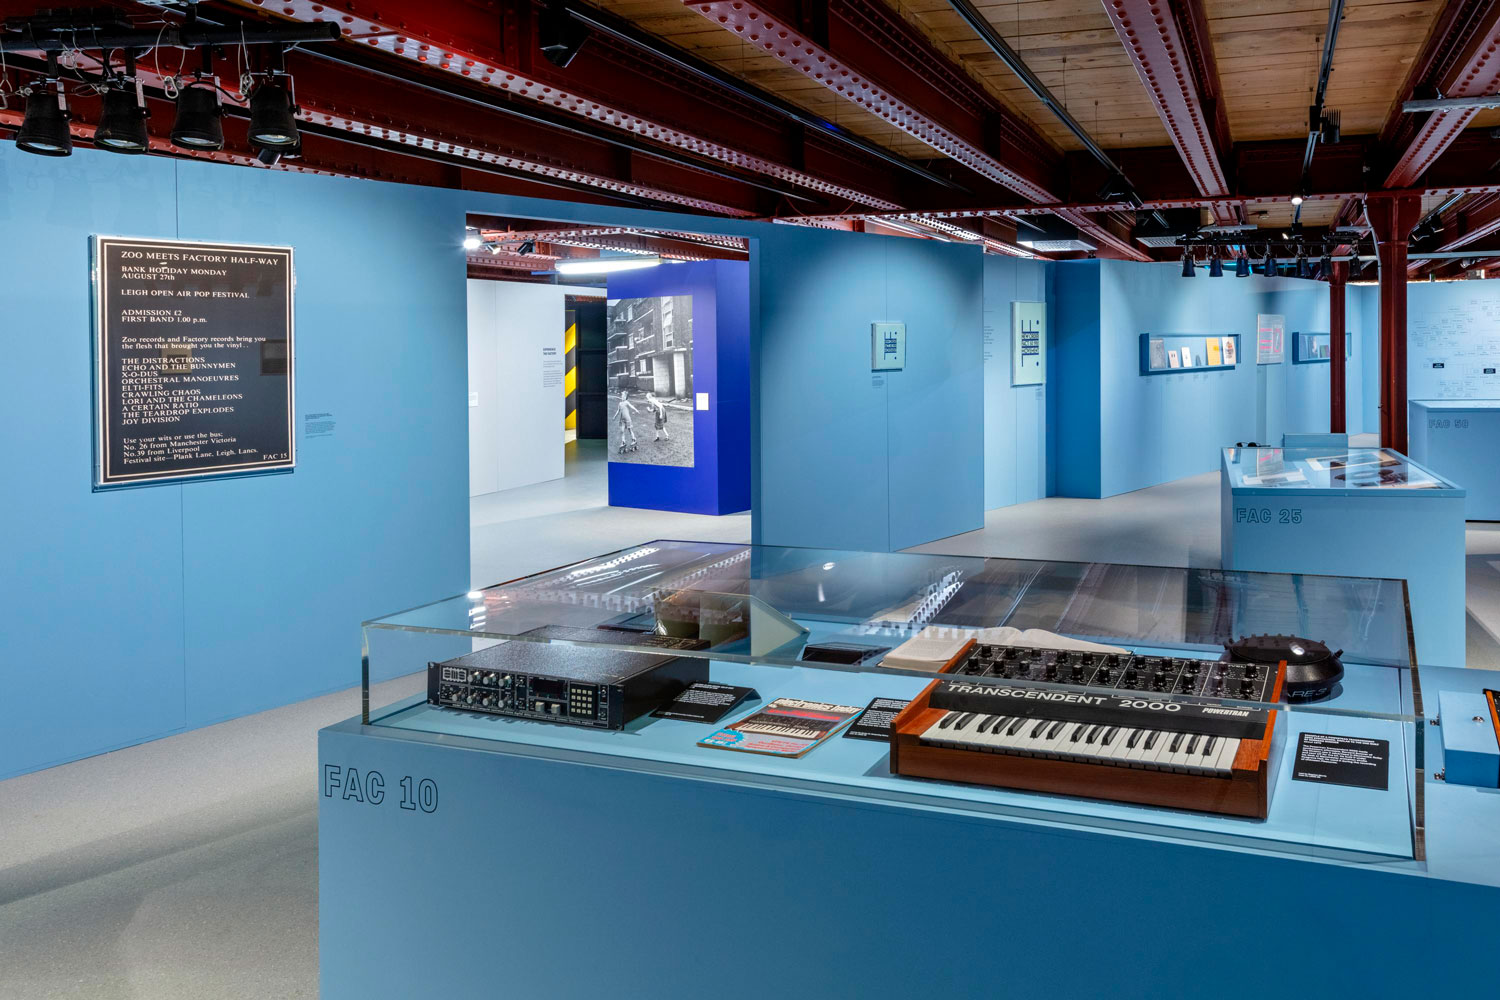 A view of some of the innovative technology used by Martin Hannett and Joy Division on display in Use Hearing Protection